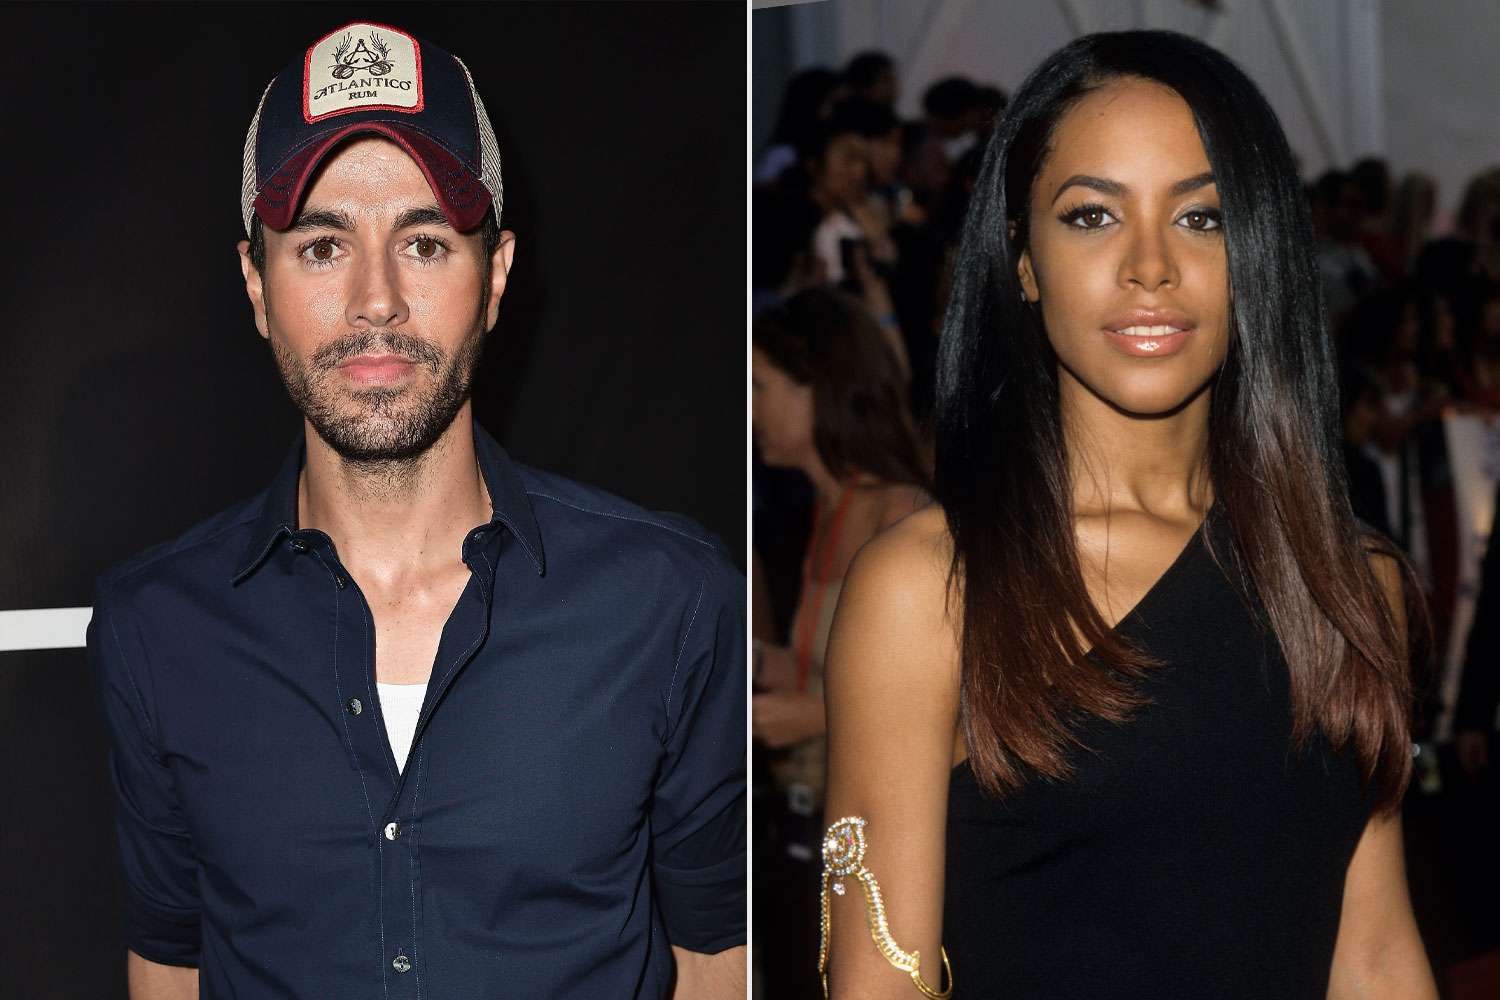 Enrique Iglesias and Aaliyah 'Were Close Friends,' Says Jennifer Love Hewitt: 'He Was Really Crying'